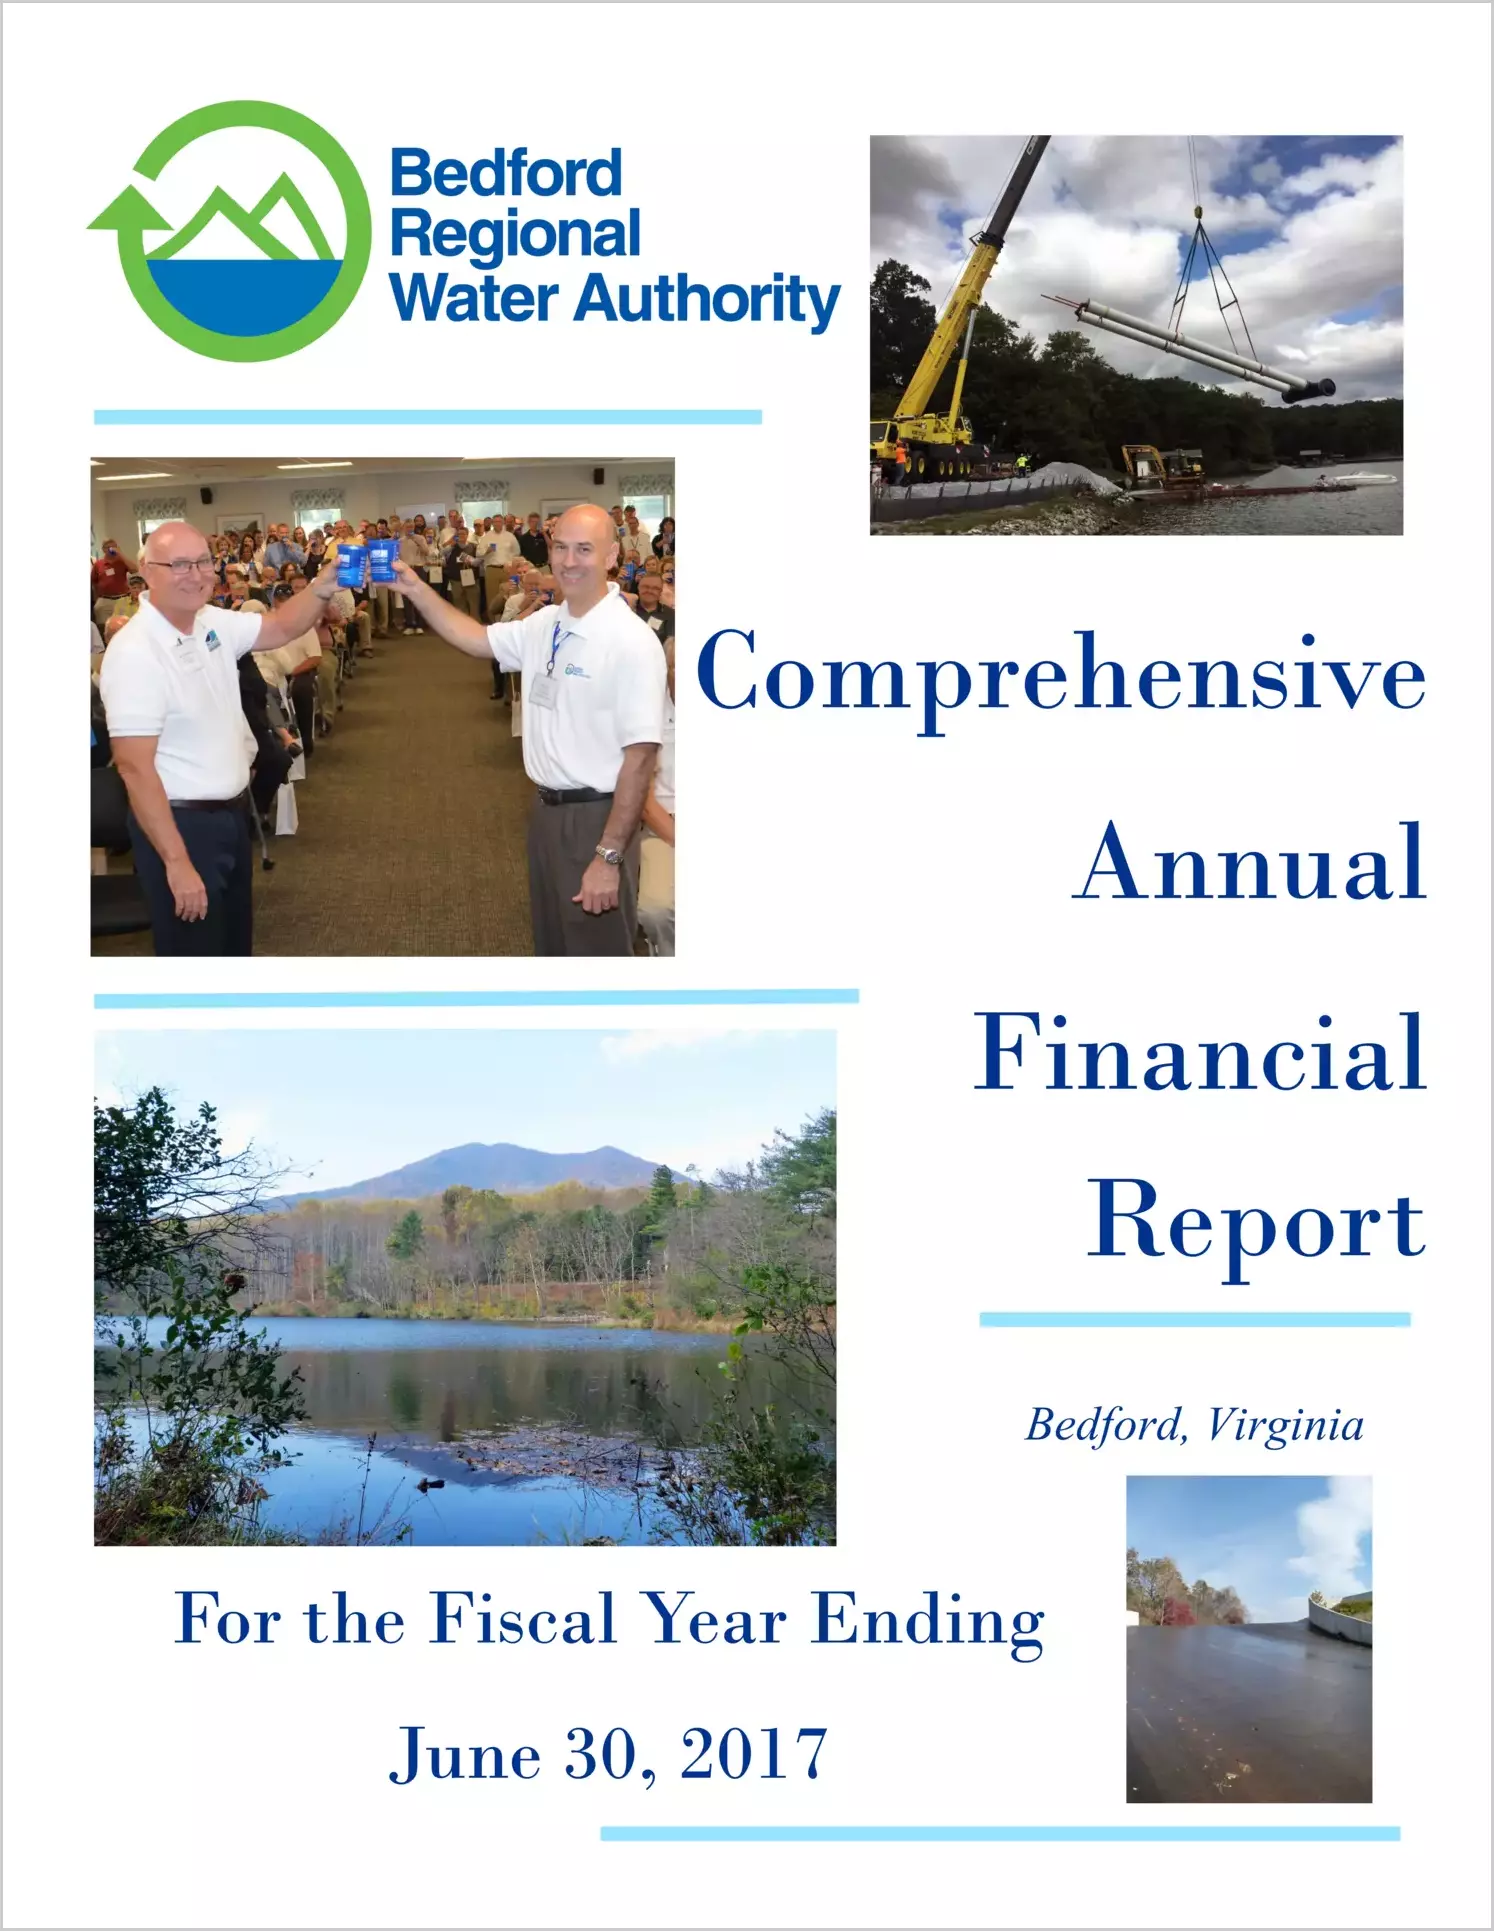 2017 ABC/Other Annual Financial Report  for Bedford Regional Water Authority